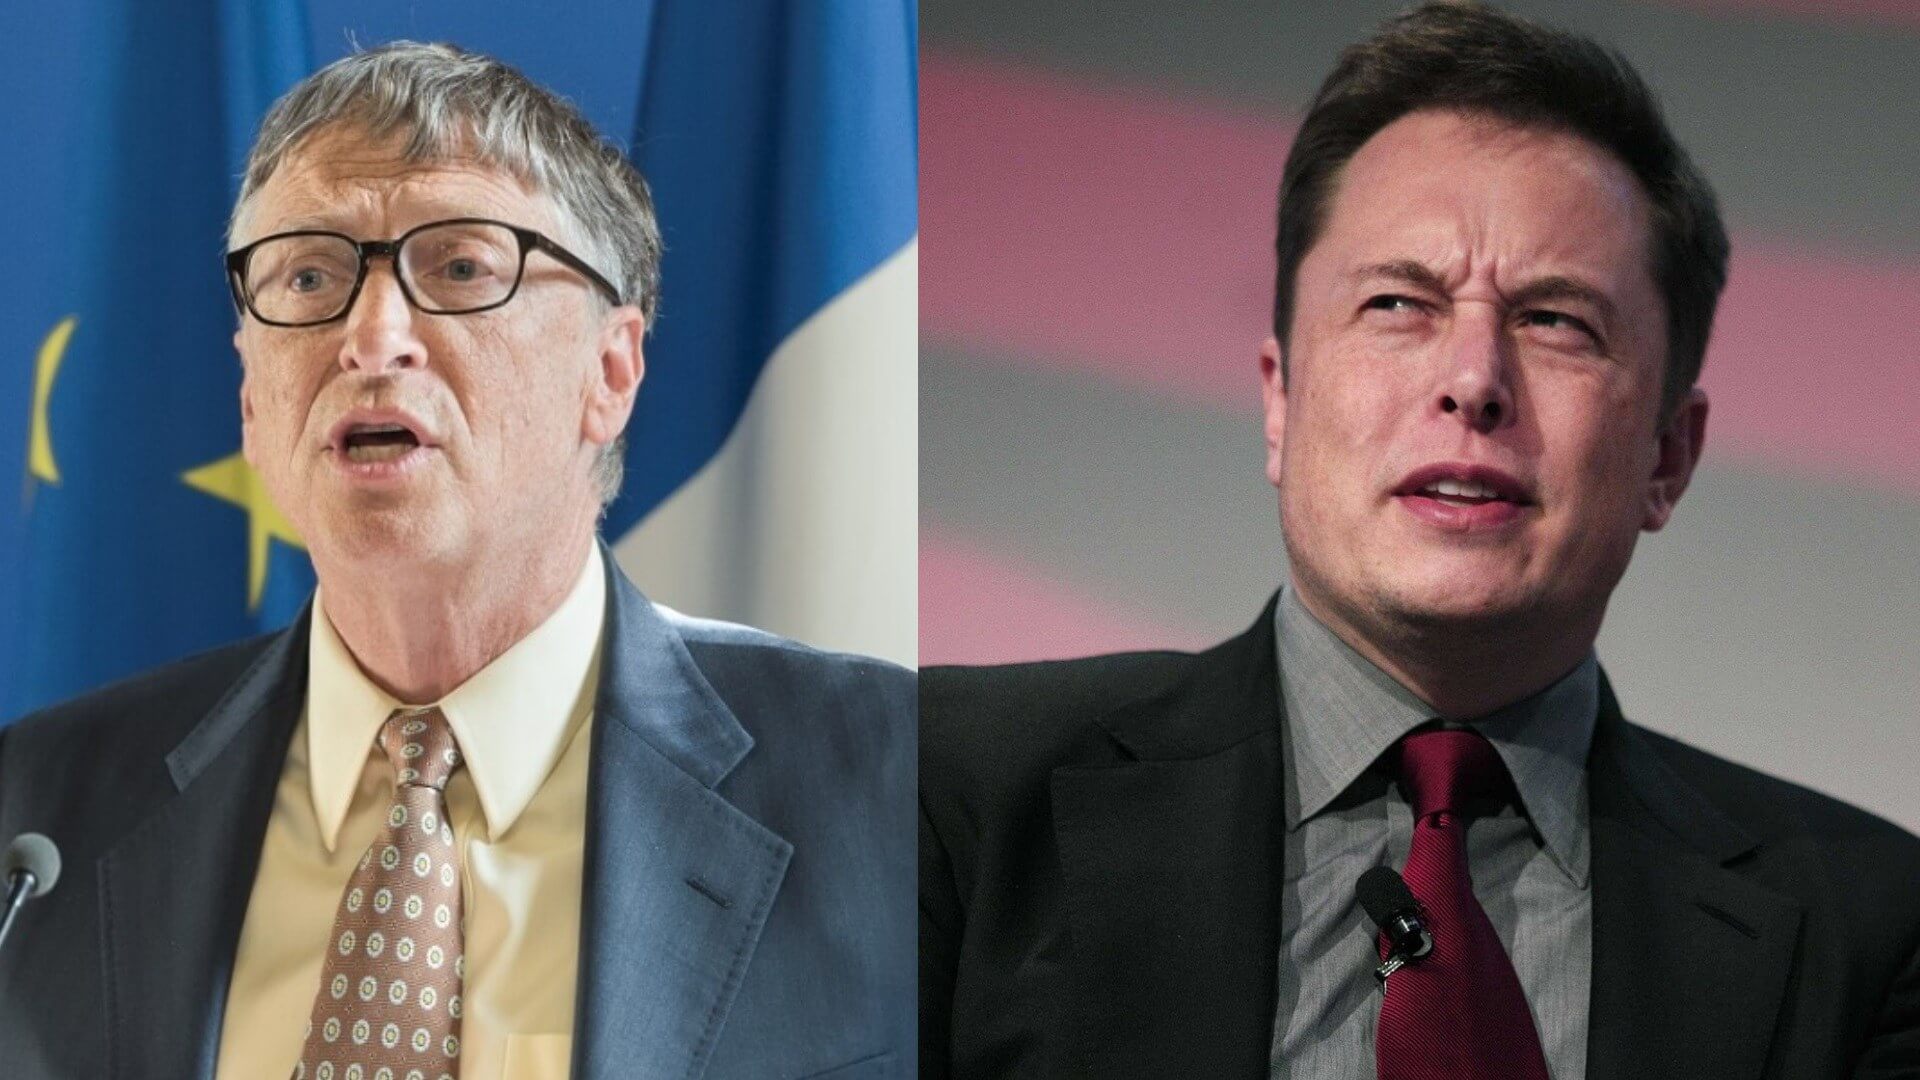 Bill Gates takes aim at Elon Musk: I'd rather fund vaccines than go to Mars